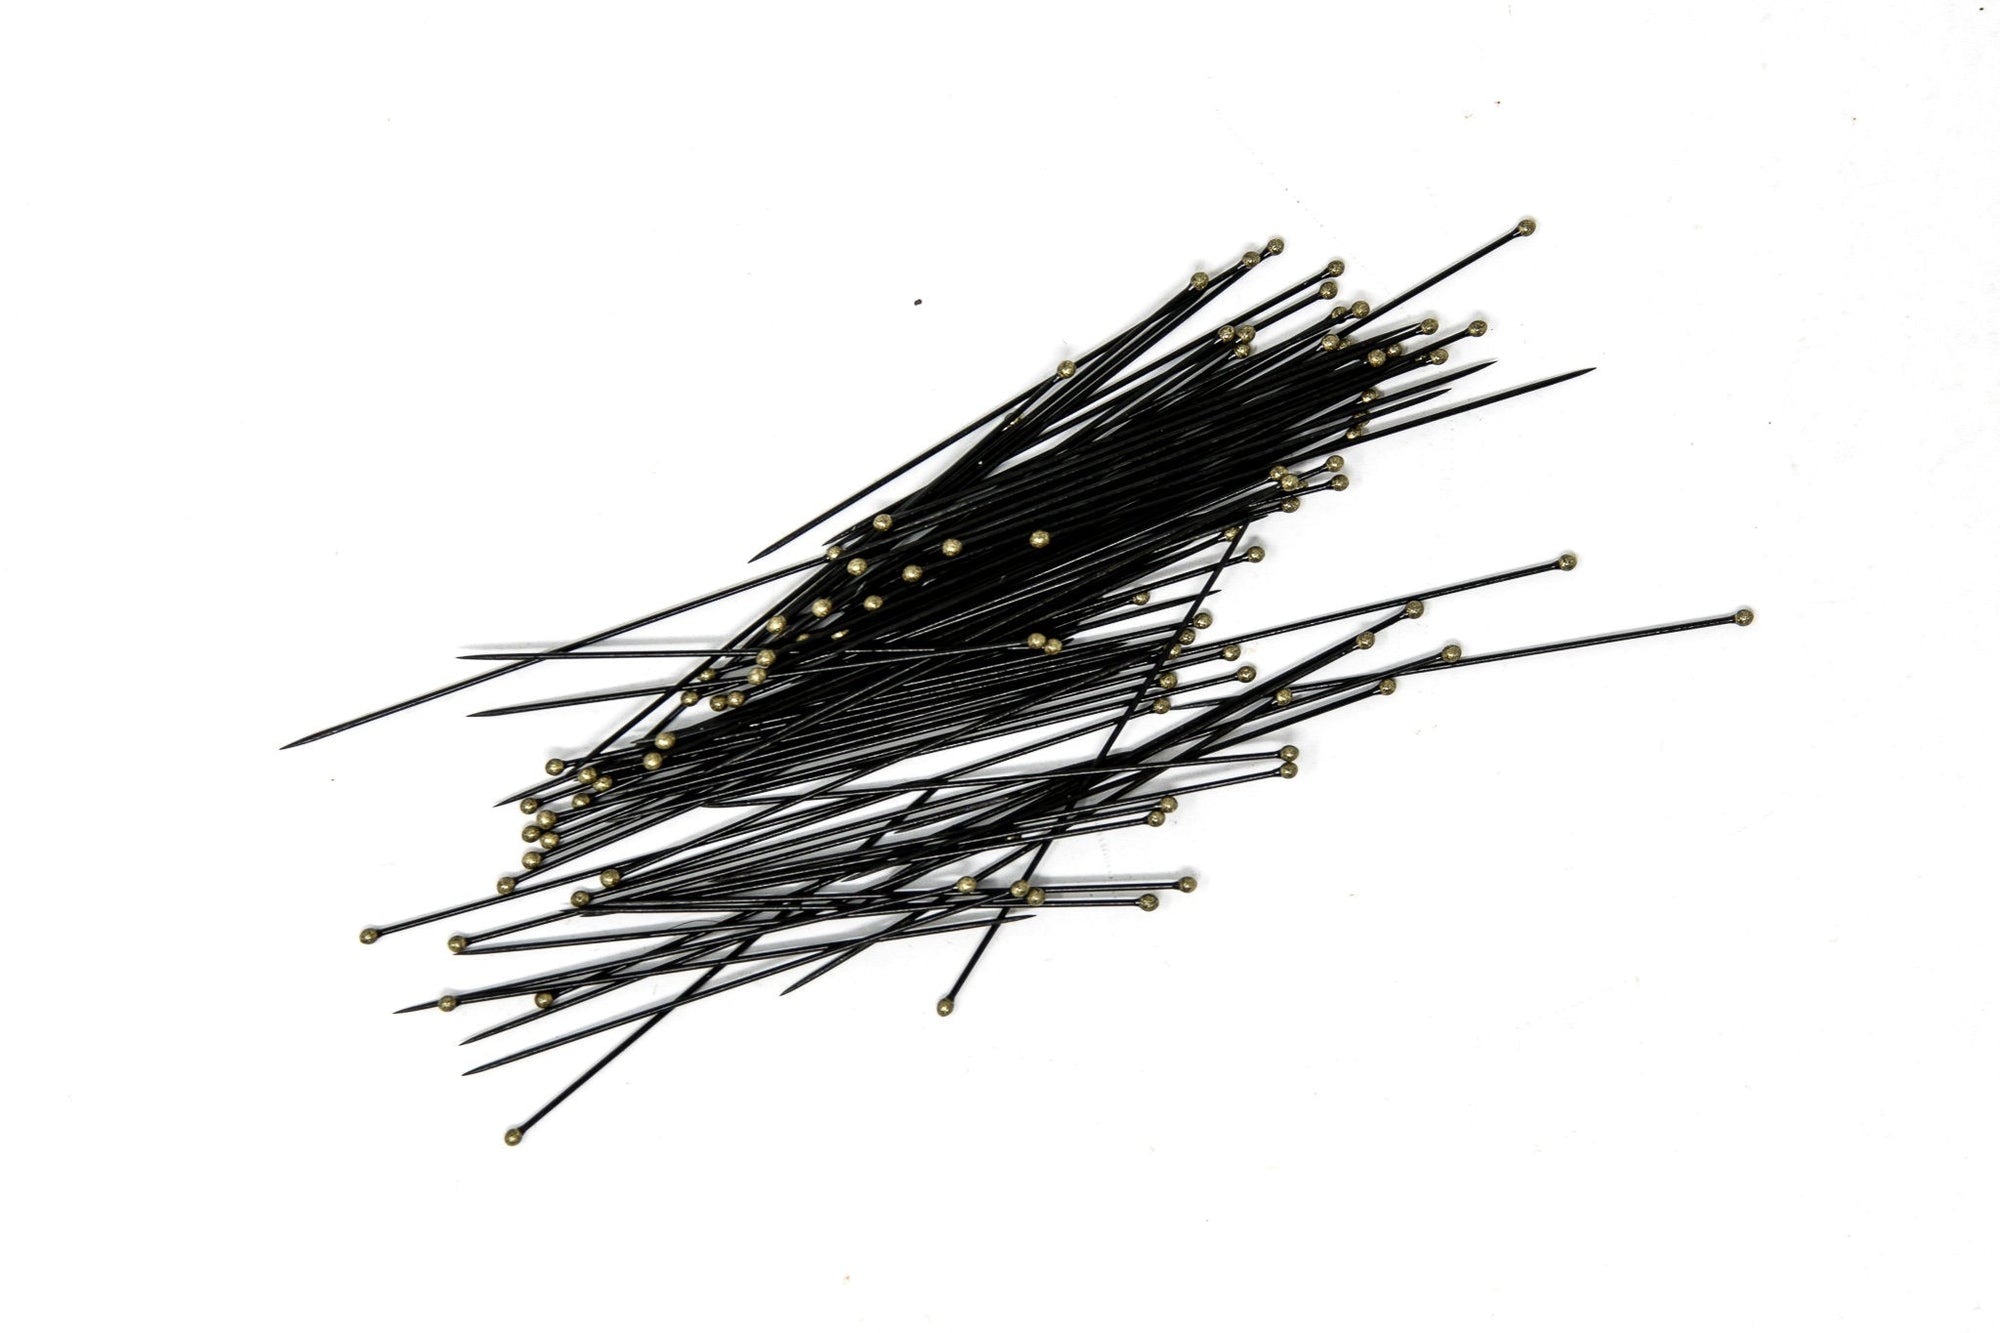 Insect Entomology Pins | 100 Per Pack for Setting Butterflies and Insect Specimens | Continental Black Nylon Head Pins No.4